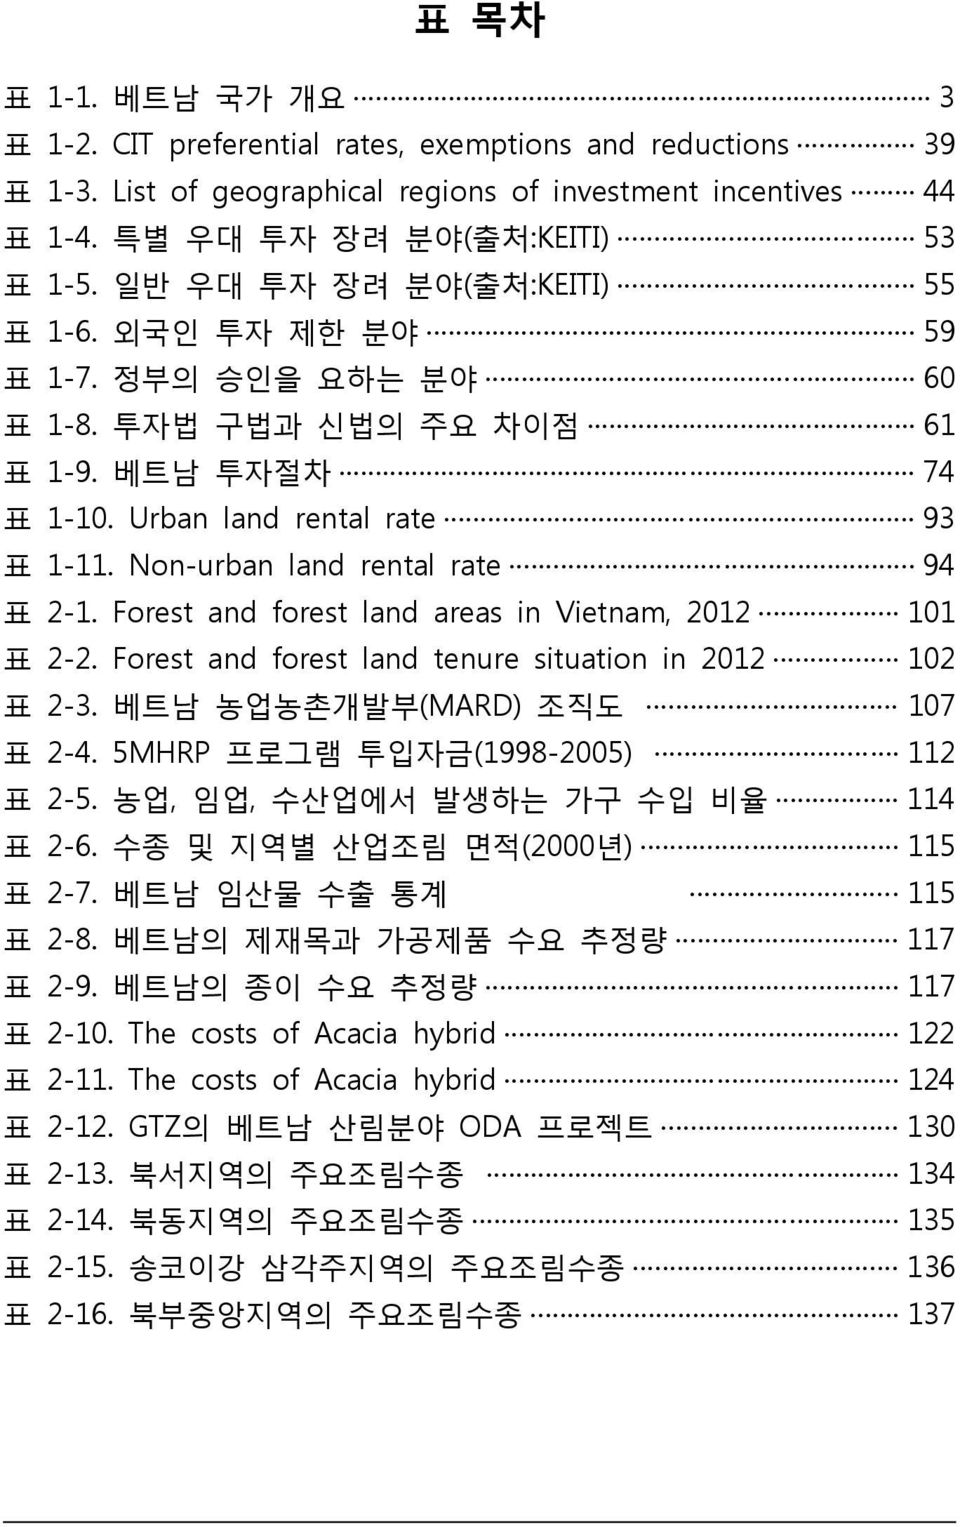 Non-urban land rental rate 94 표 2-1. Forest and forest land areas in Vietnam, 2012 101 표 2-2. Forest and forest land tenure situation in 2012 102 표 2-3. 베트남 농업농촌개발부(MARD) 조직도 107 표 2-4.